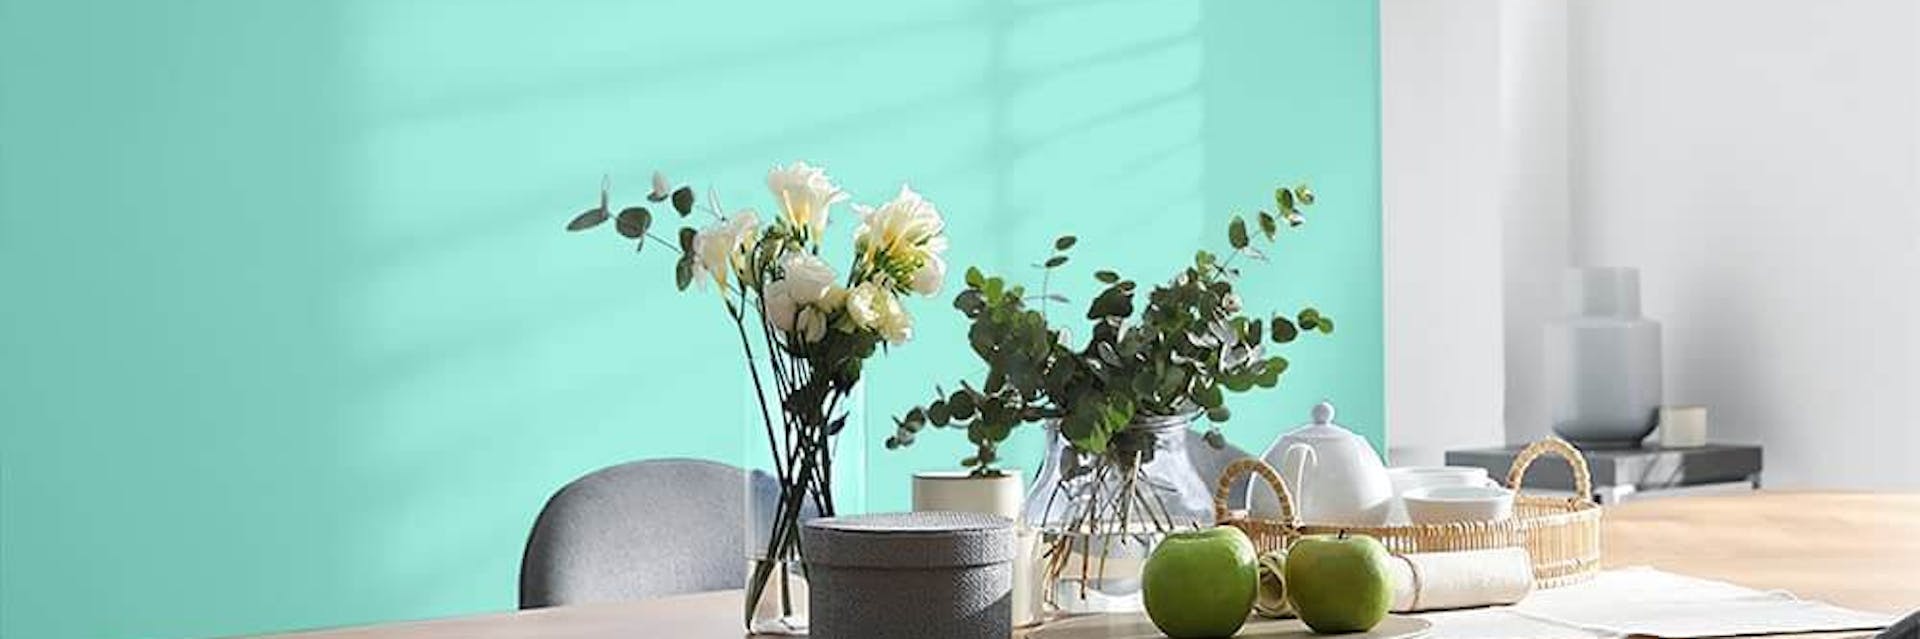 Lively mint green accent wall in a dining room